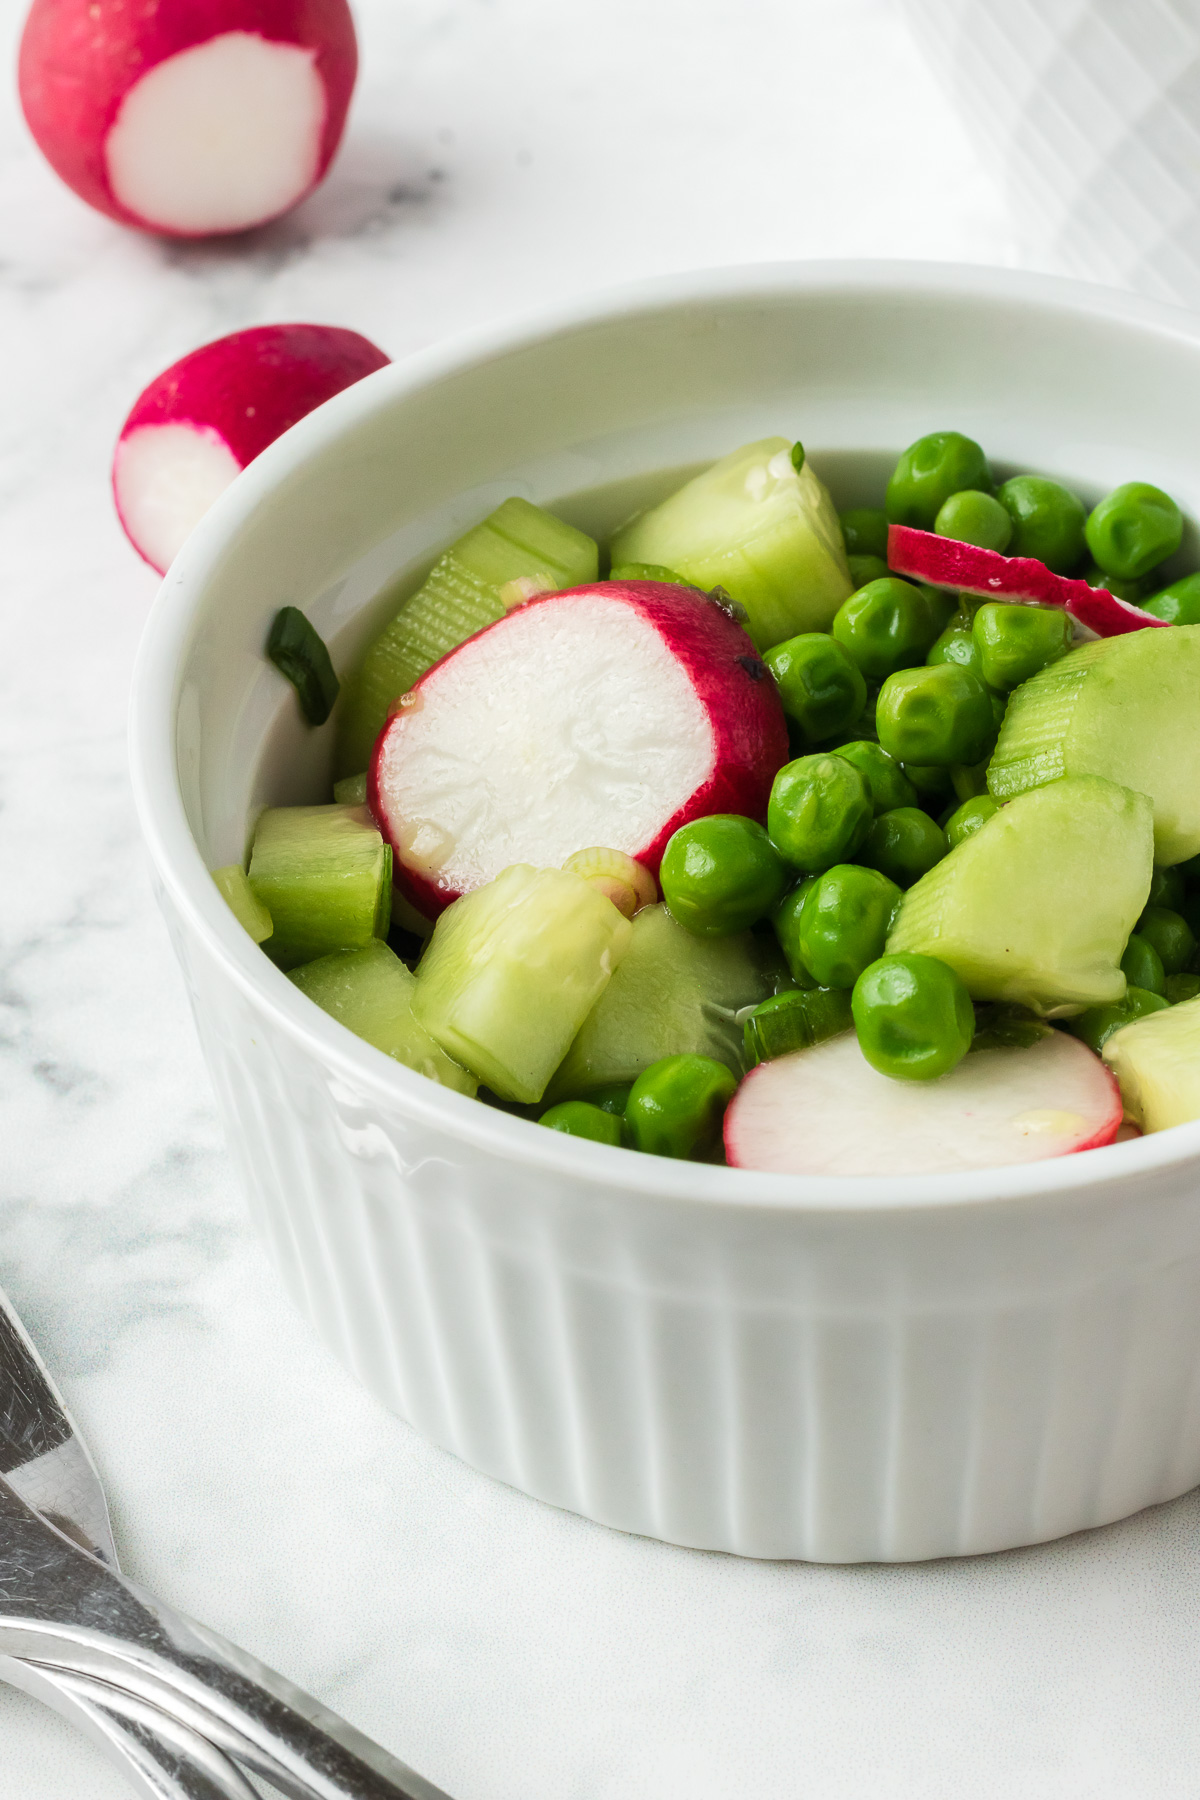 This light and refreshing Crunchy Pea Salad combines sweet peas, crunchy radishes, and cucumbers tossed in a sweet and tangy vinaigrette. It’s the perfect lunch on a hot summer day! via @foodhussy